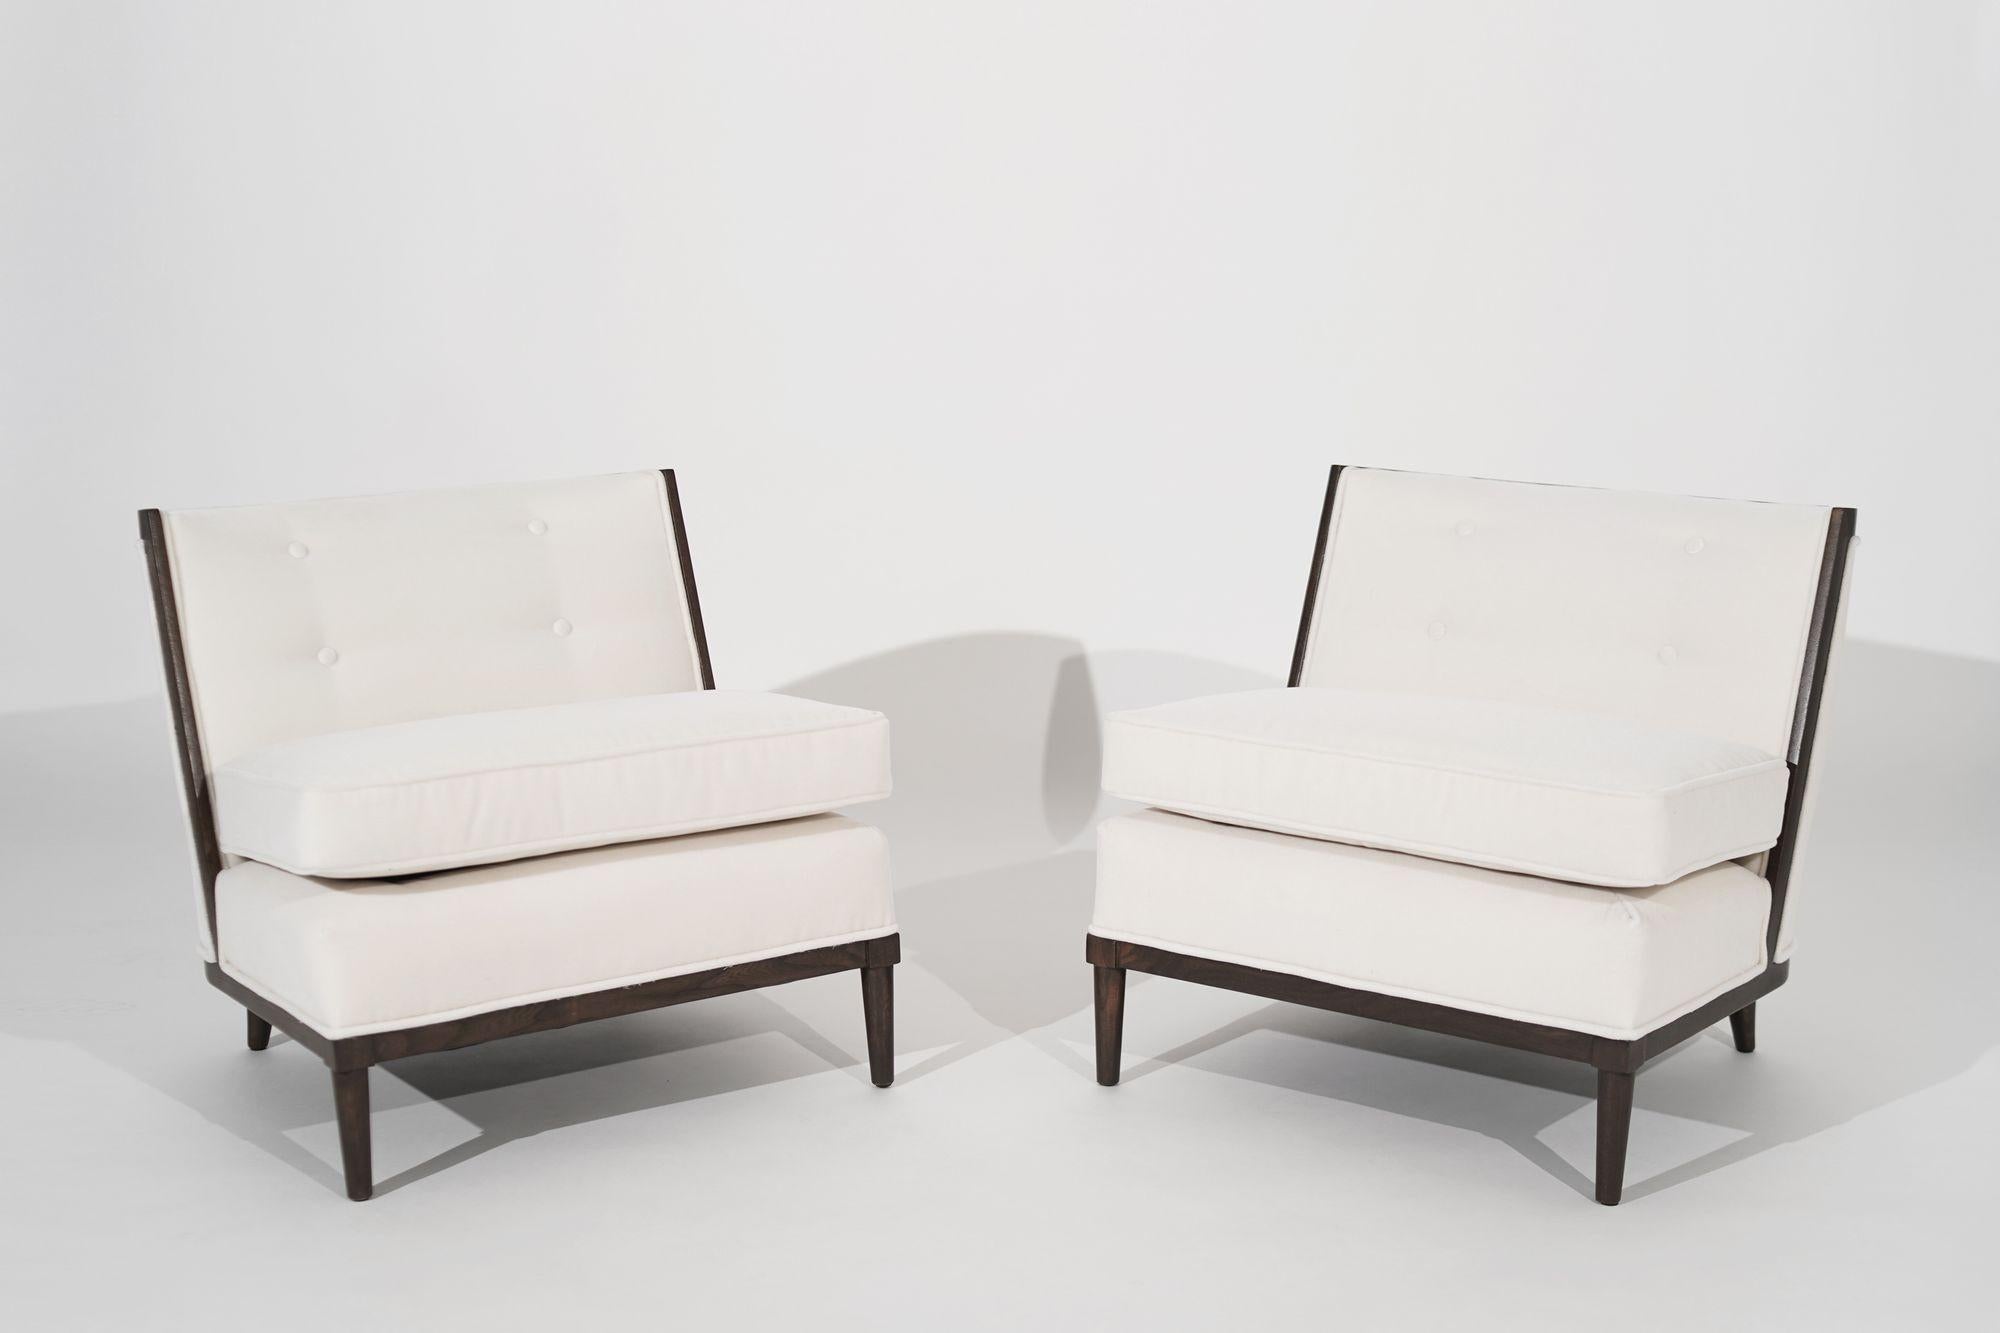 20th Century Transitional Slipper Chairs in Ivory Mohair, circa 1950s For Sale